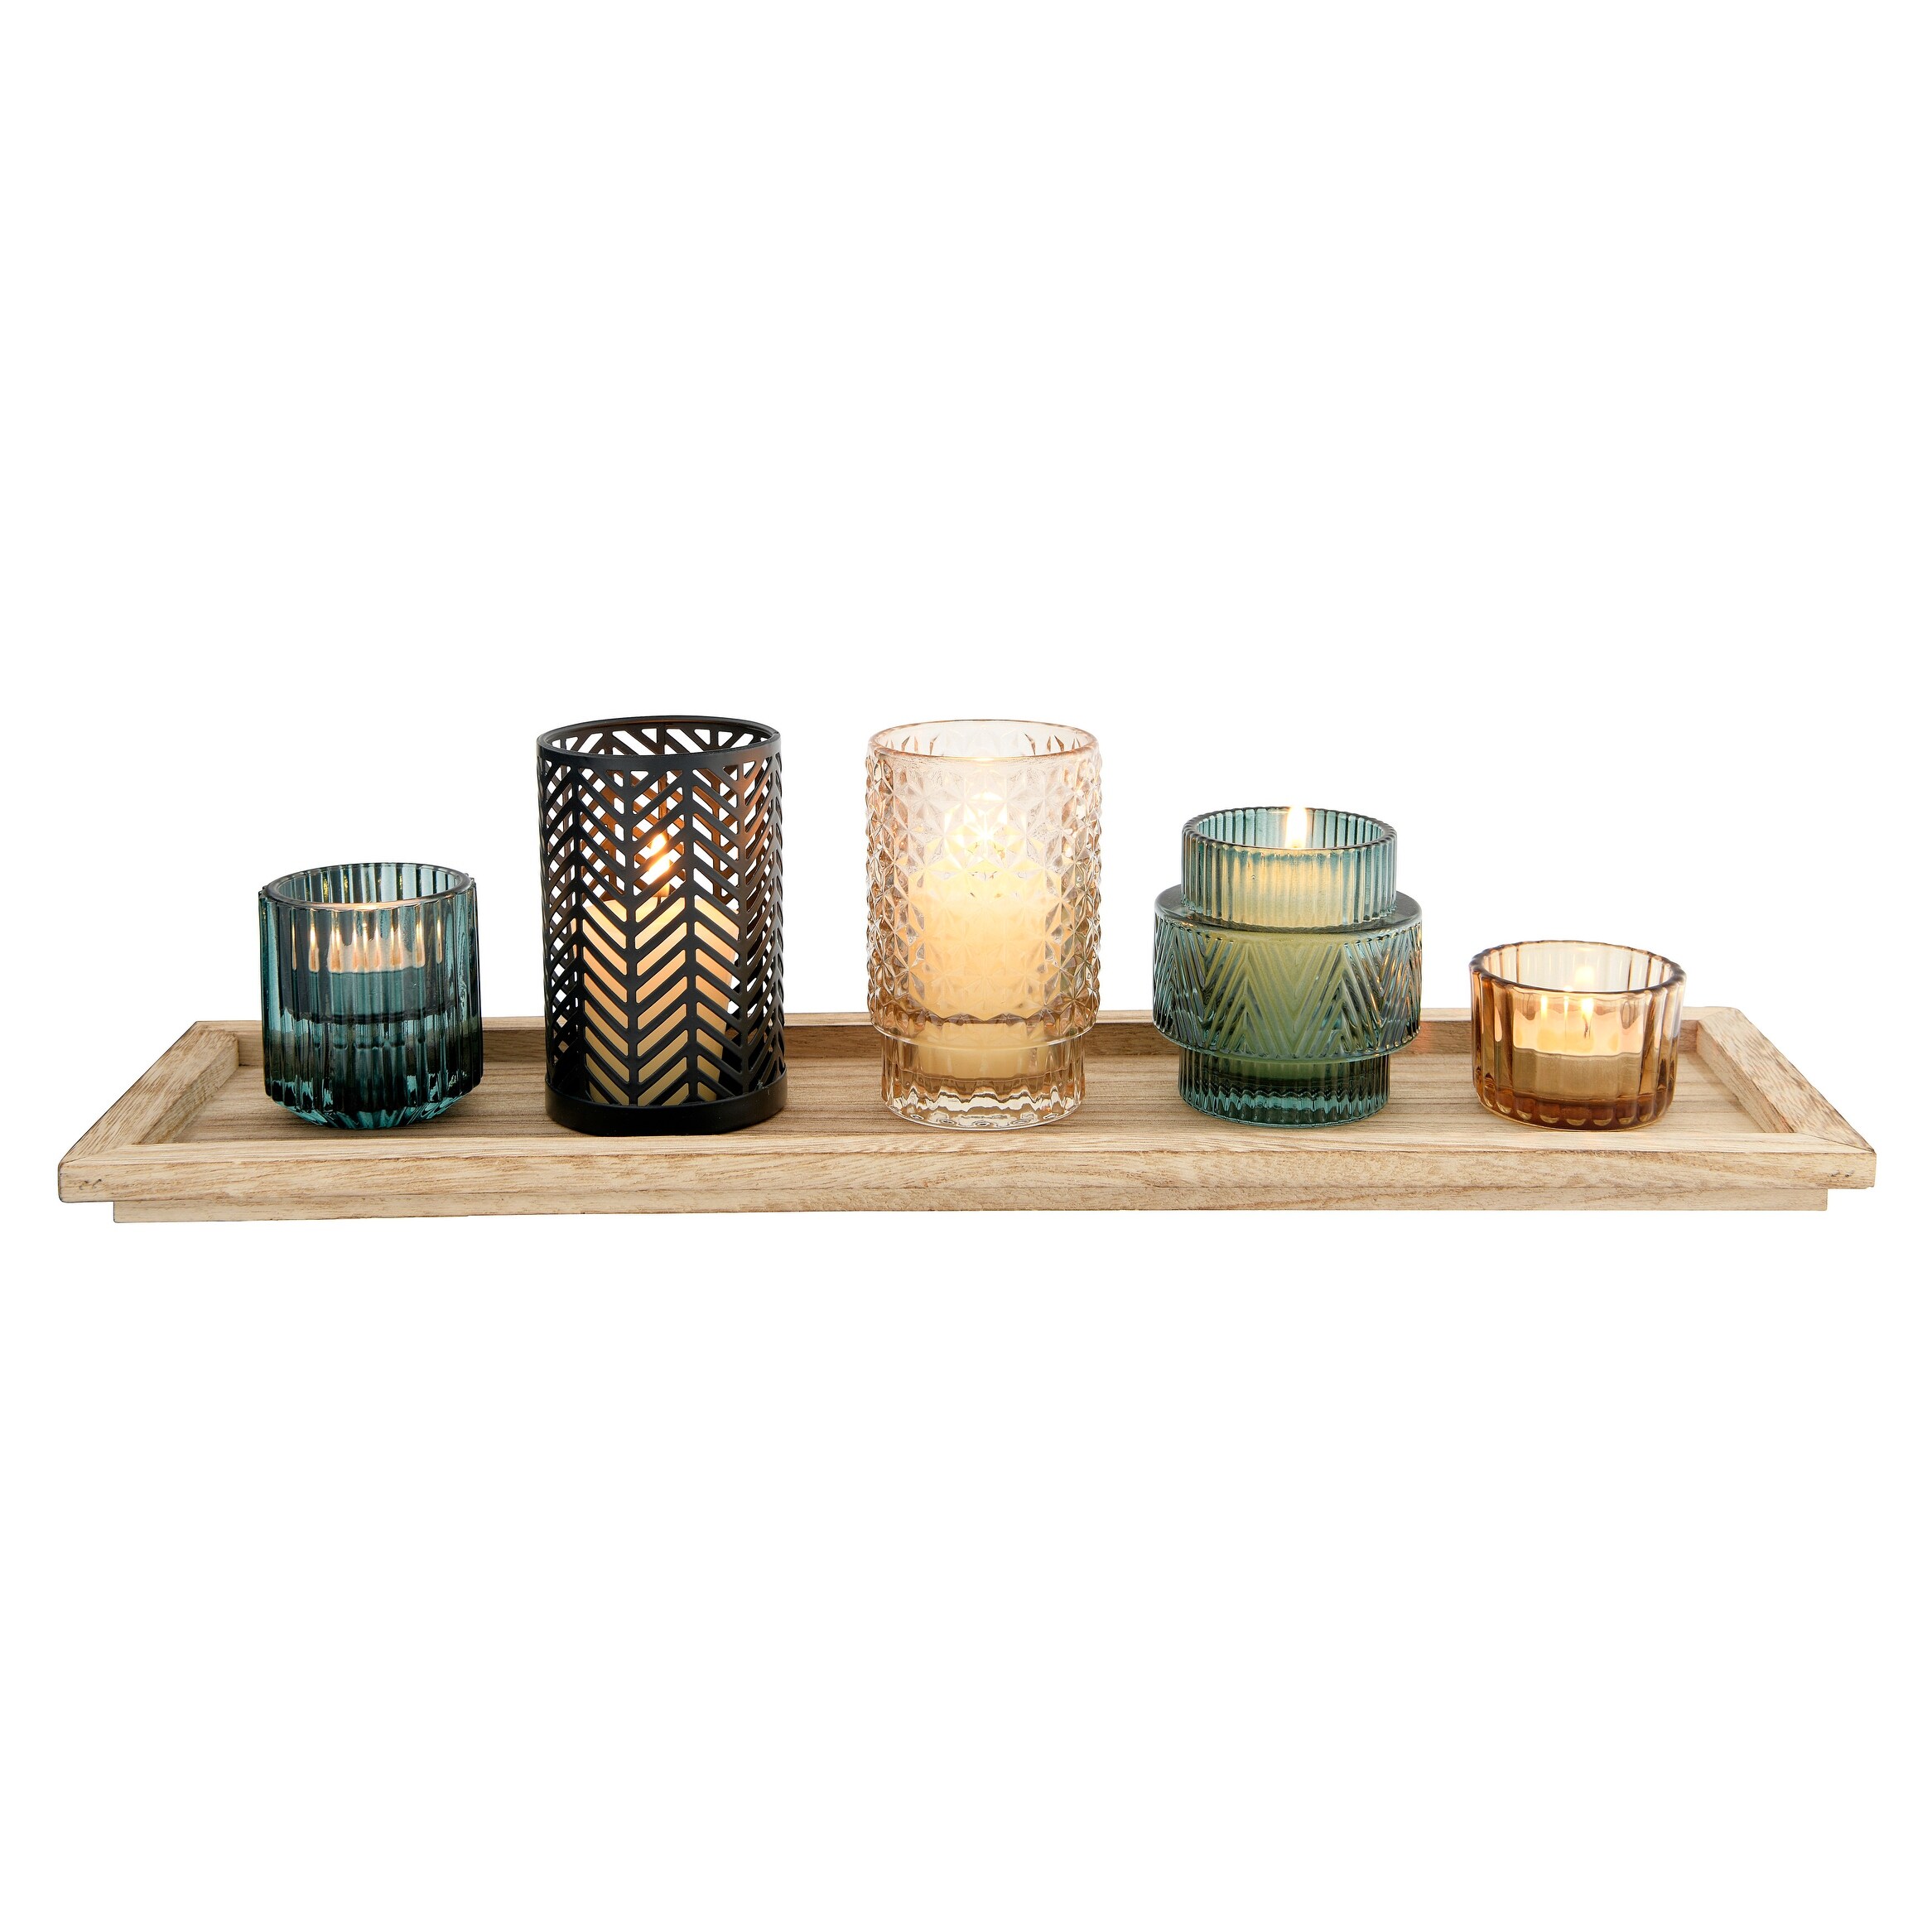 https://ak1.ostkcdn.com/images/products/is/images/direct/a6ed17a3271c2ff1a0999b9d70fe2f6370f8c064/Embossed-Glass-%26-Metal-Tealight-Votive-Holders-on-Rectangle-Wood-Tray-%28Set-of-6-Pieces%29.jpg